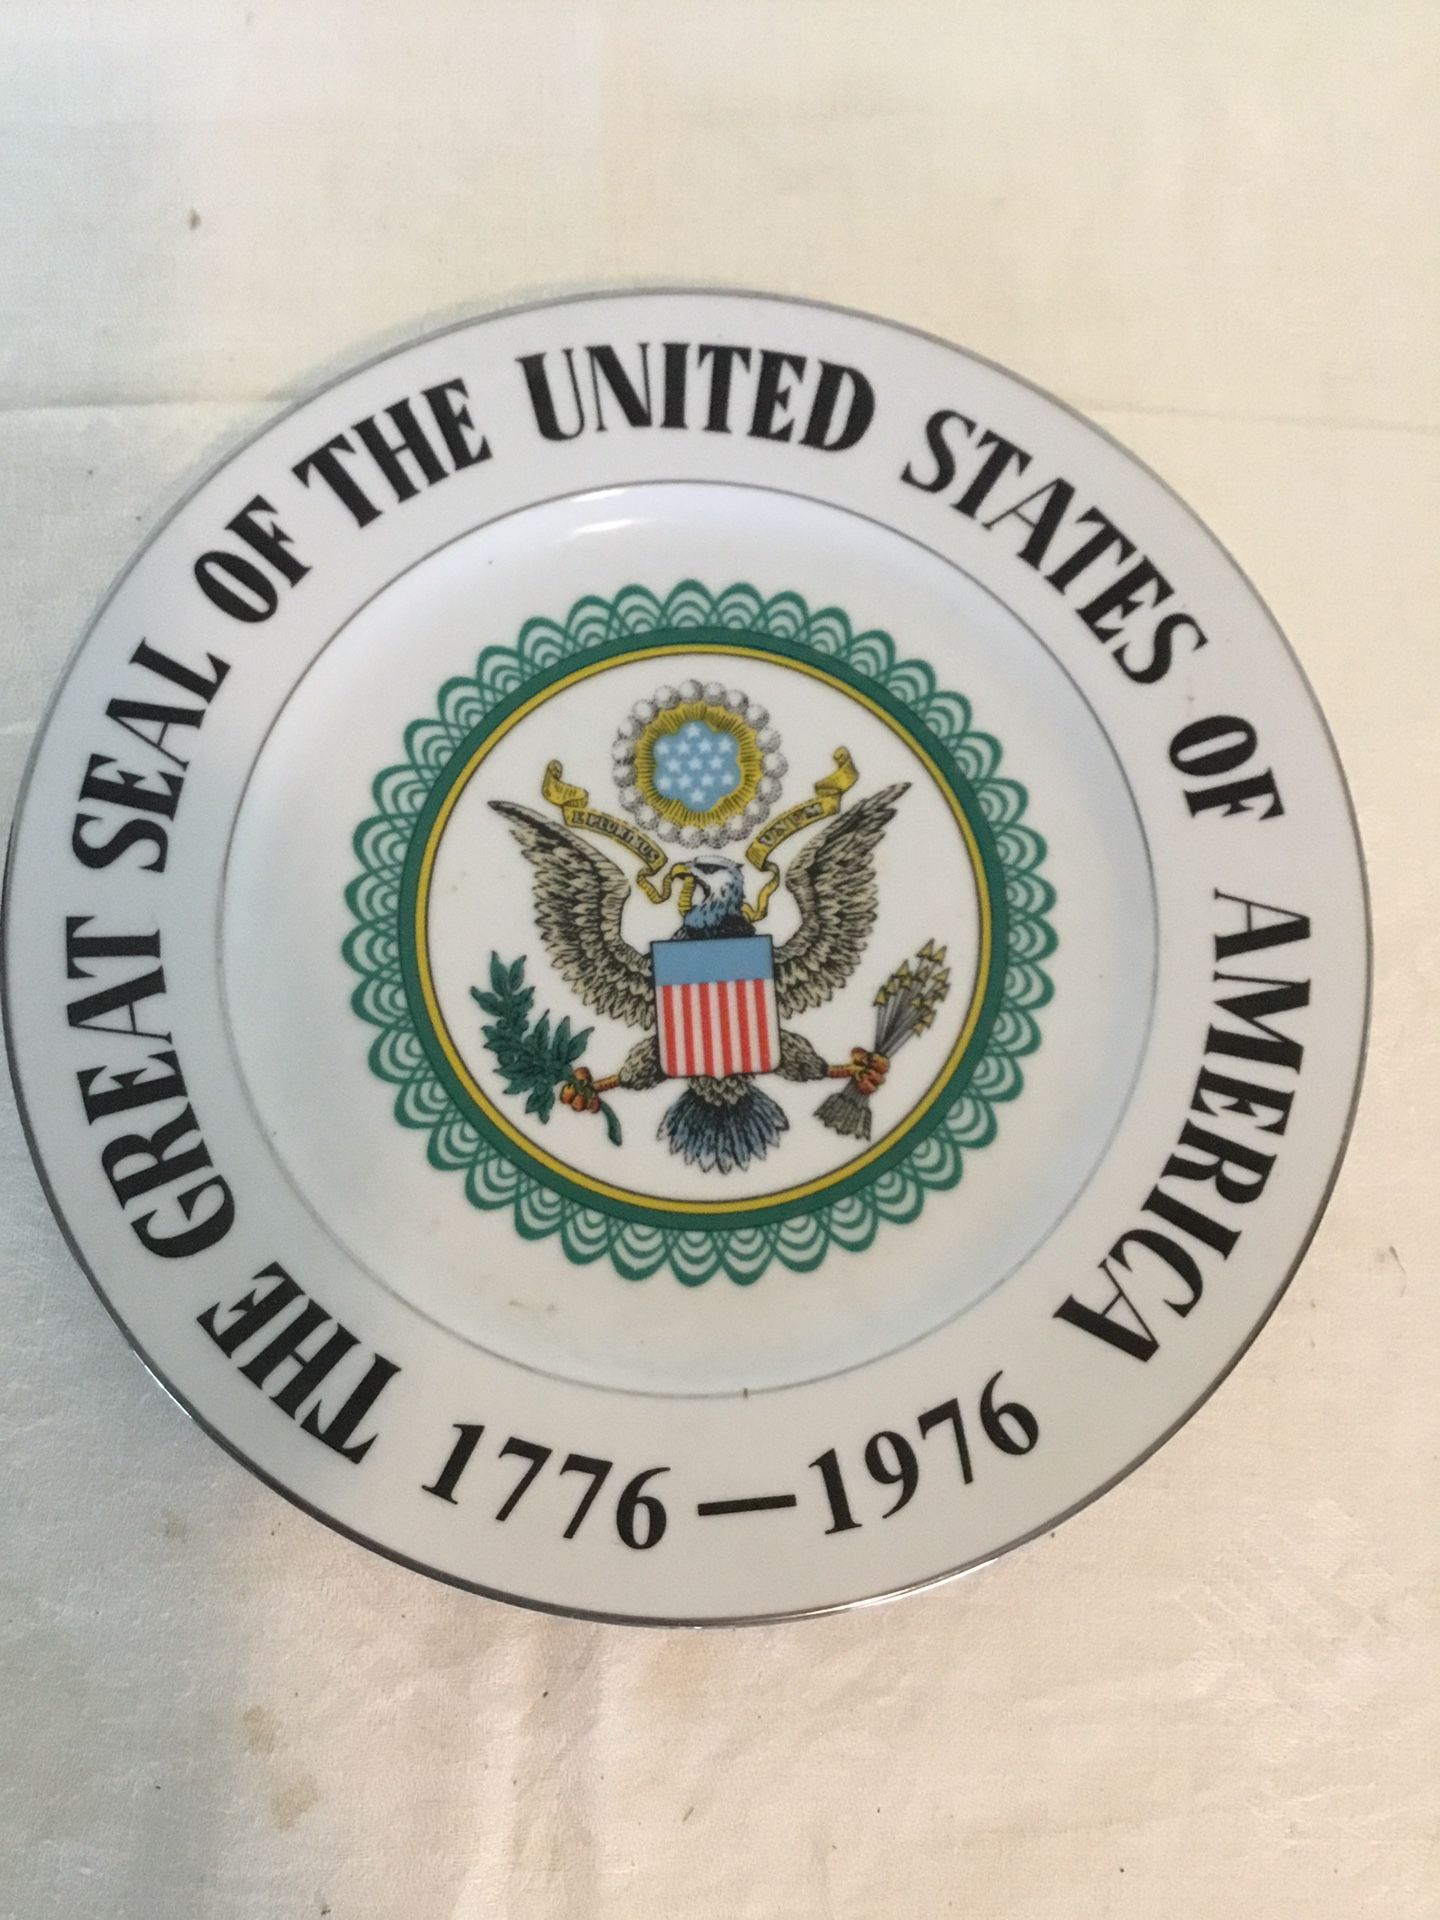 The Great Seal Of The United States Of America Ceramic Decorative